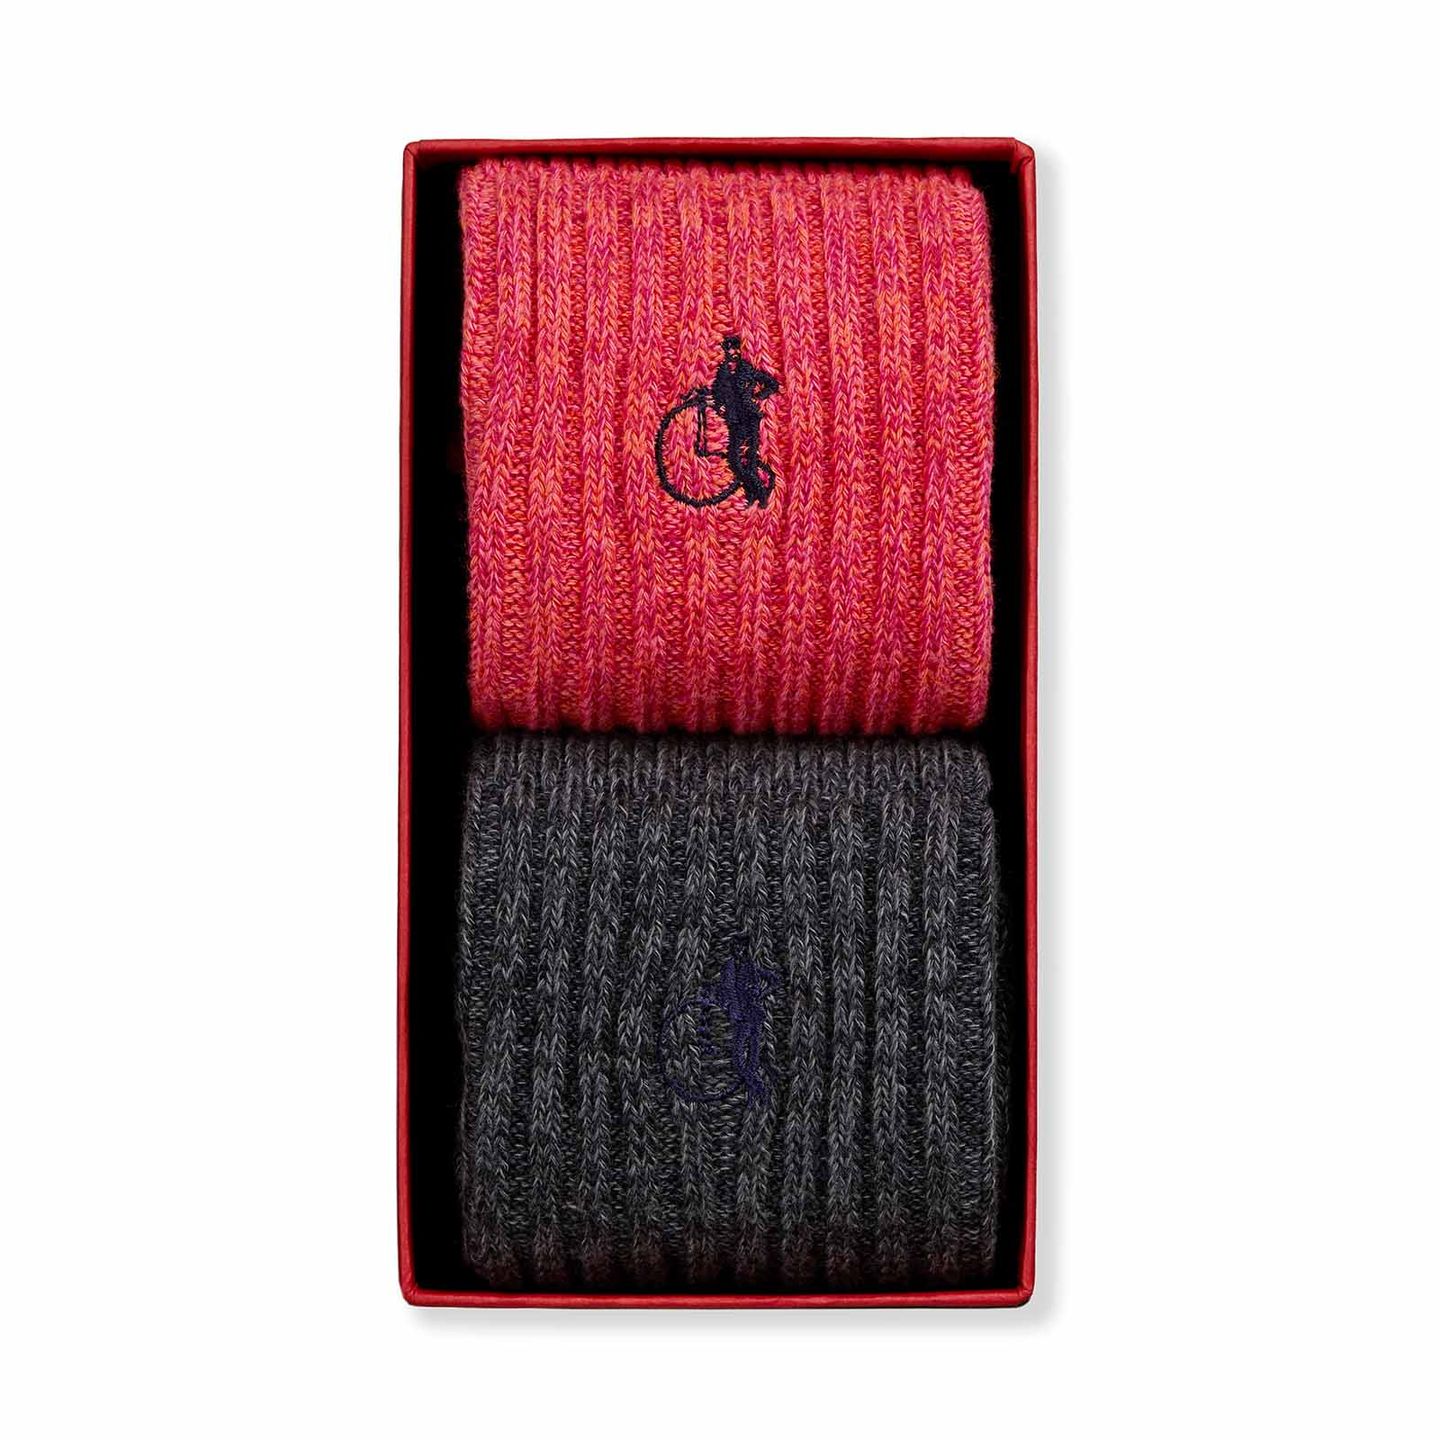 2 pairs of socks with a fusion knit, one is red and orange embroidered with the LSC logo